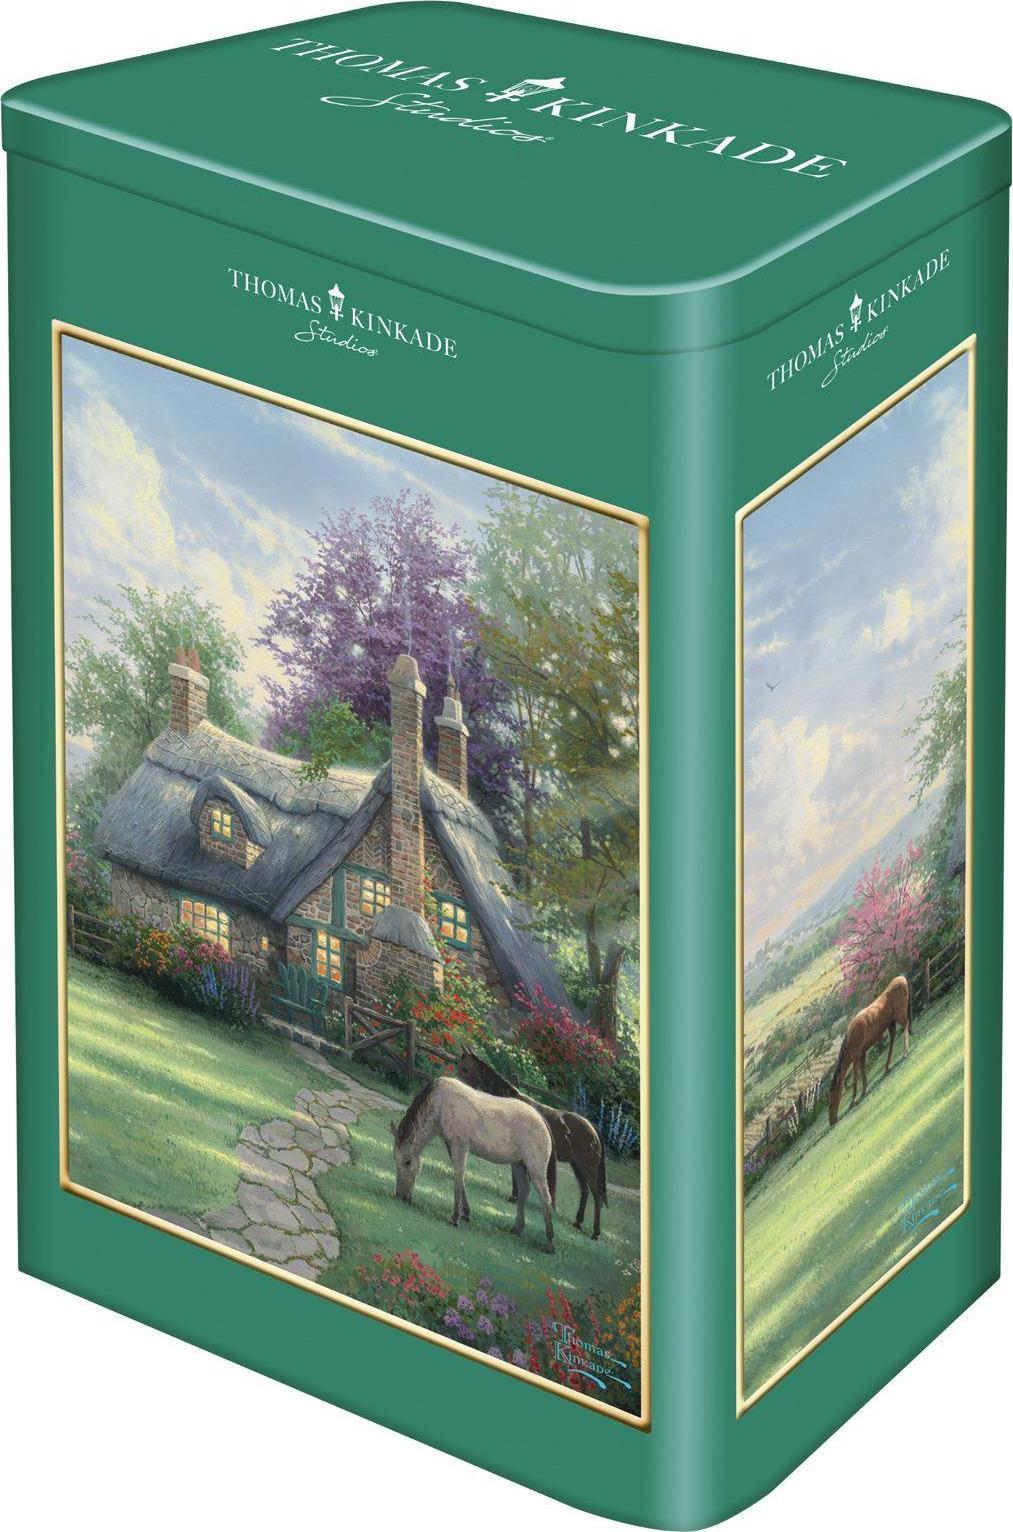 Puzzle Schmidt 500 piese - Thomas Kinkade: A Perfect Summer Day, cutie metalica